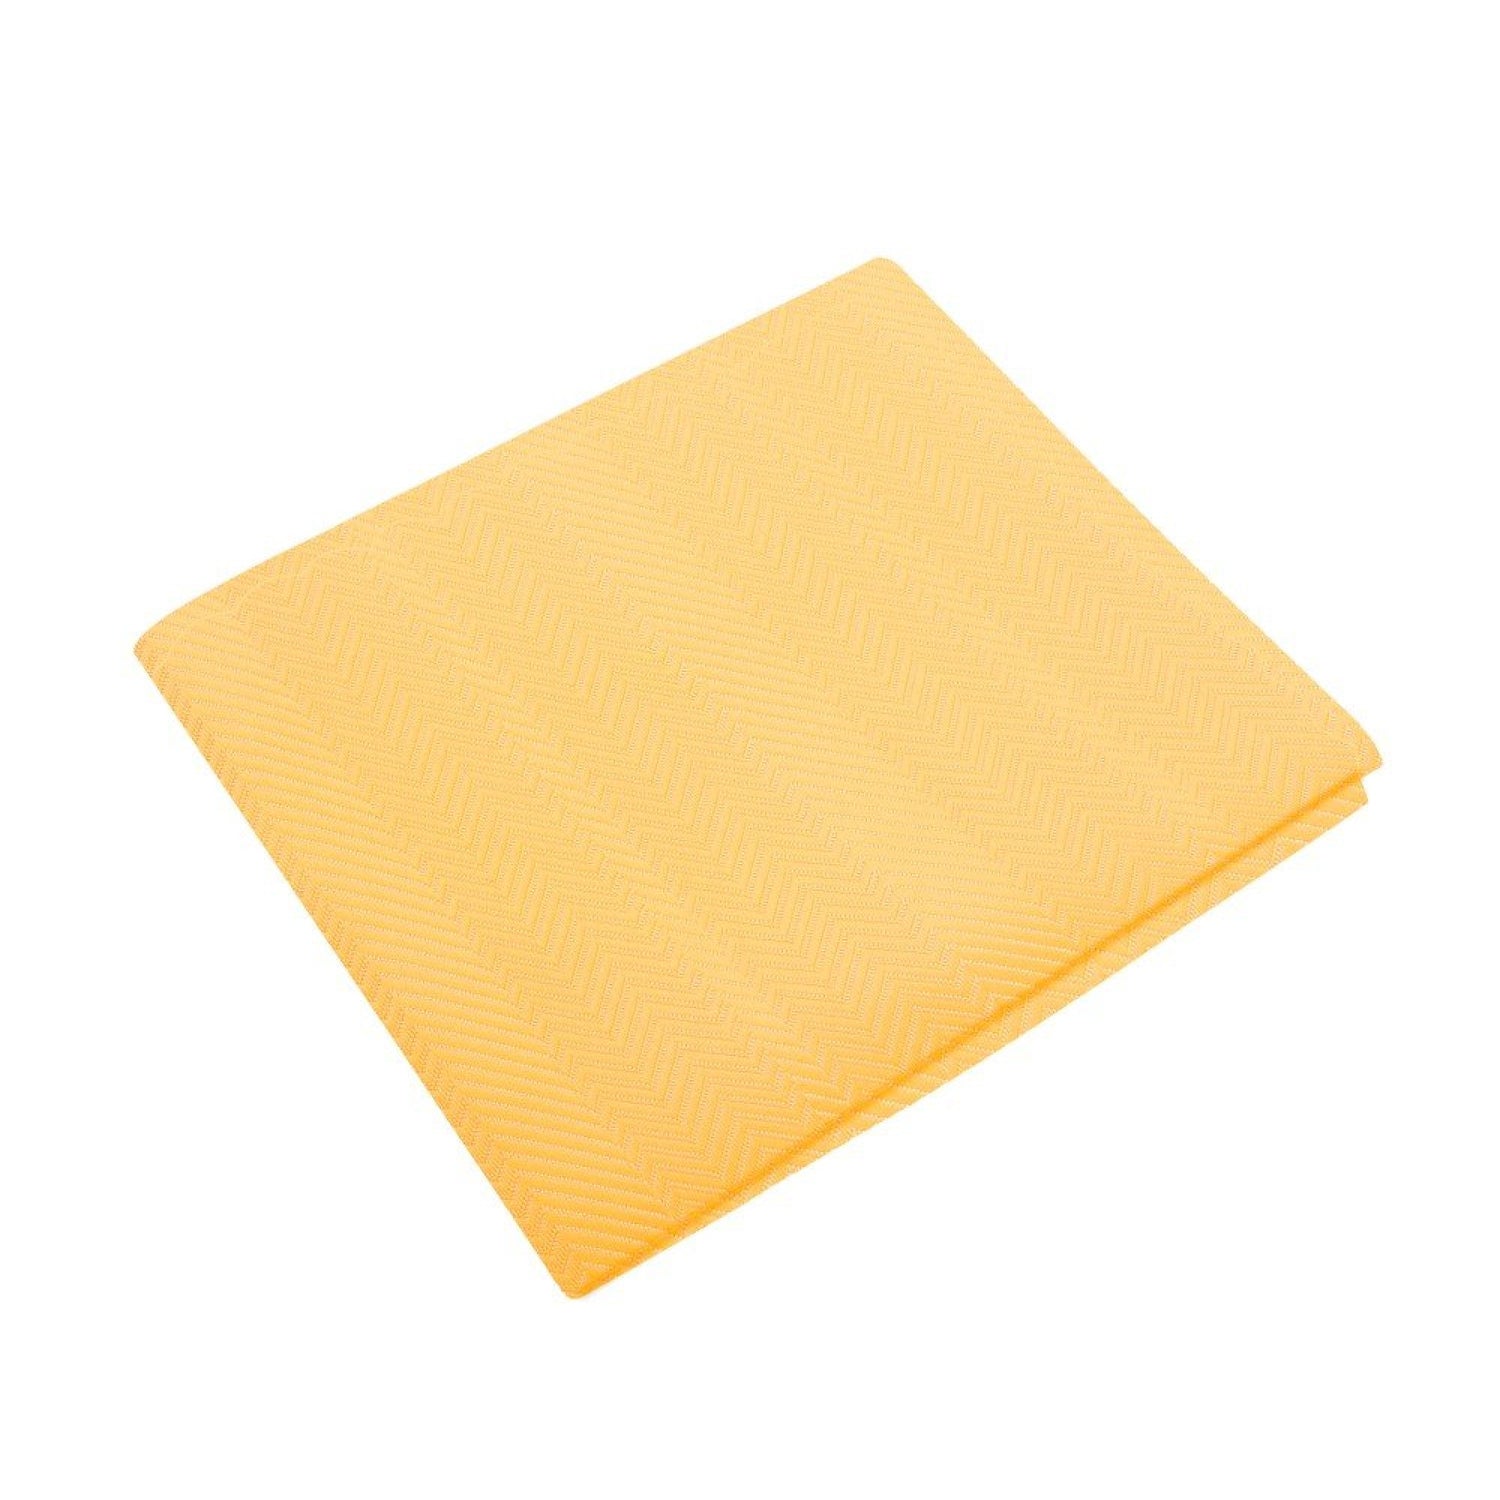 A Solid Dandelion Yellow Color with Sophisticated Lined Texture Silk Pocket Square